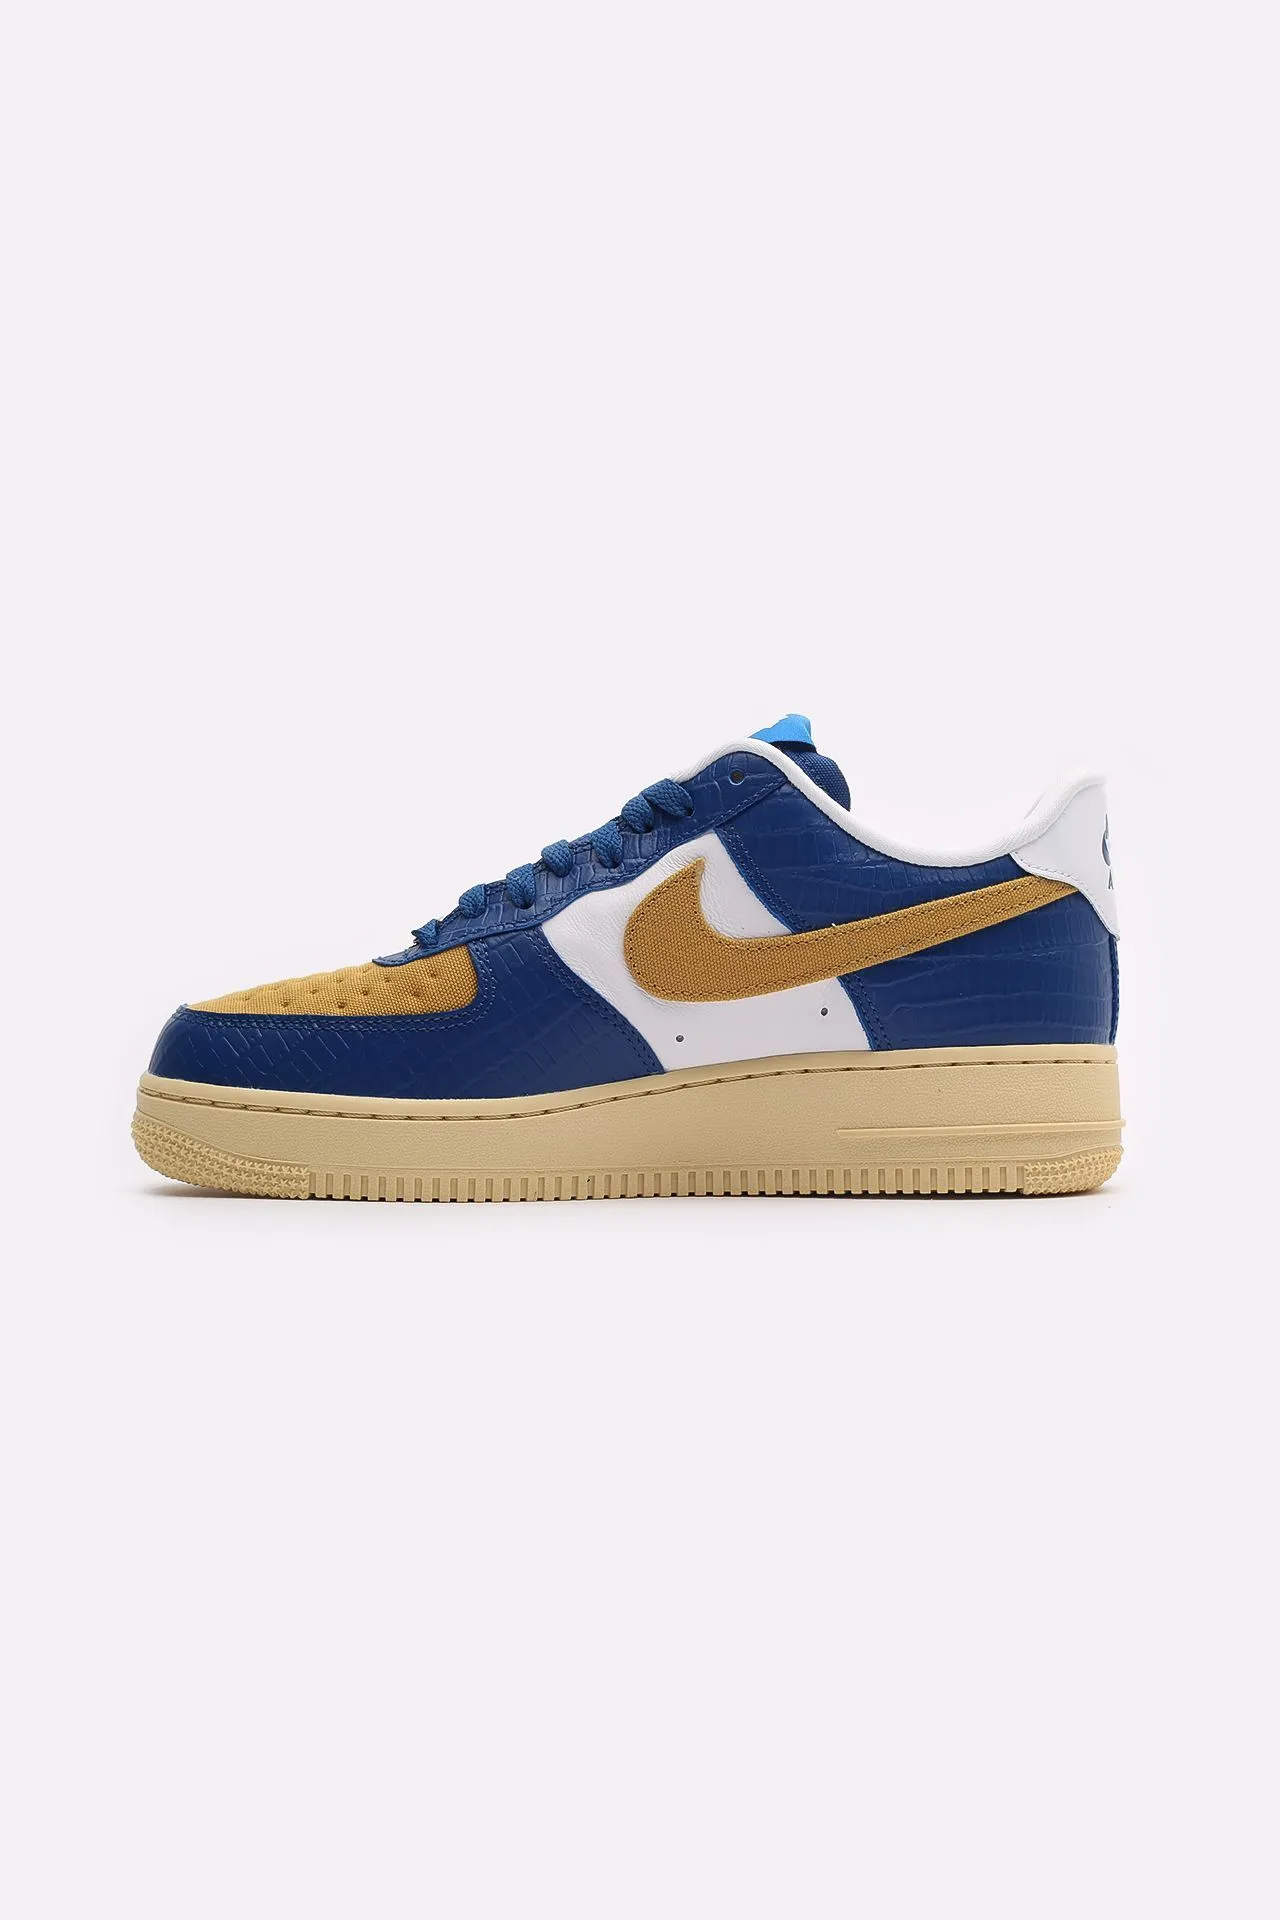 undefeated air force 1 low sp